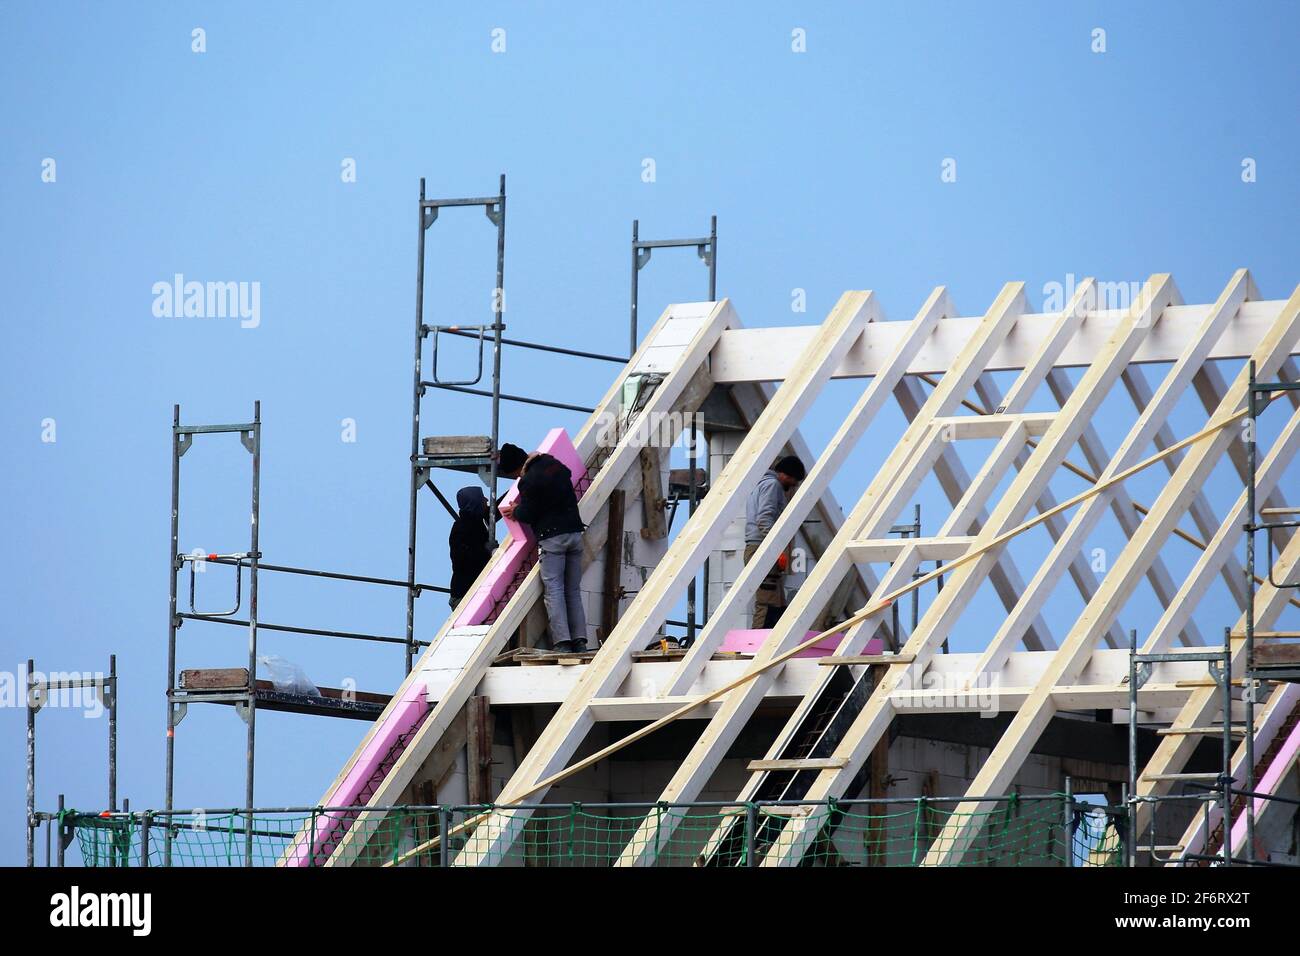 Carpentry work on a residential building. Stock Photo